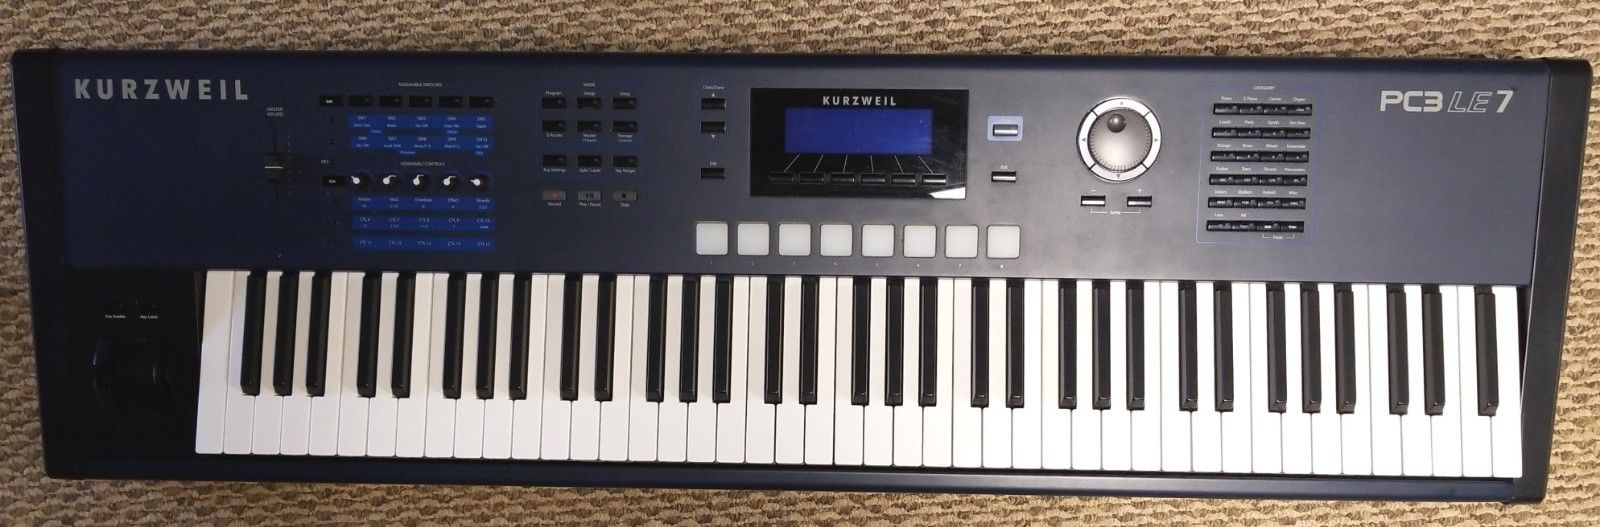 Kurzweil PC3LE7 76 note keyboard synthesizer pedal soft case excellent condition